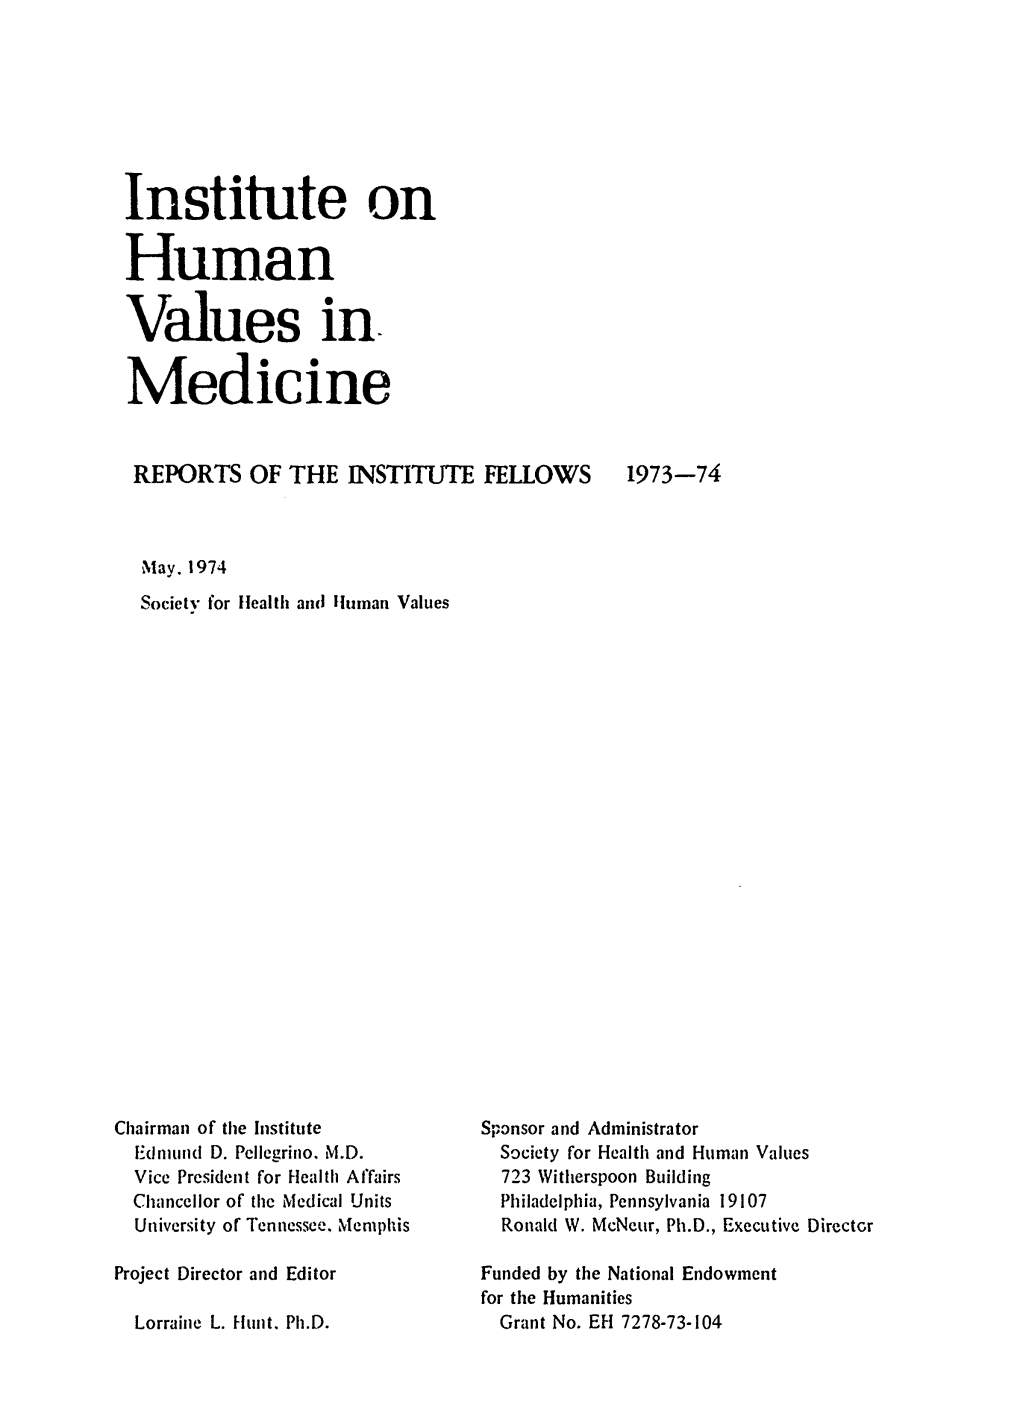 Institute on Human Values in Medicine REPORTS of the INSTITUTE FELLOWS 1973-74